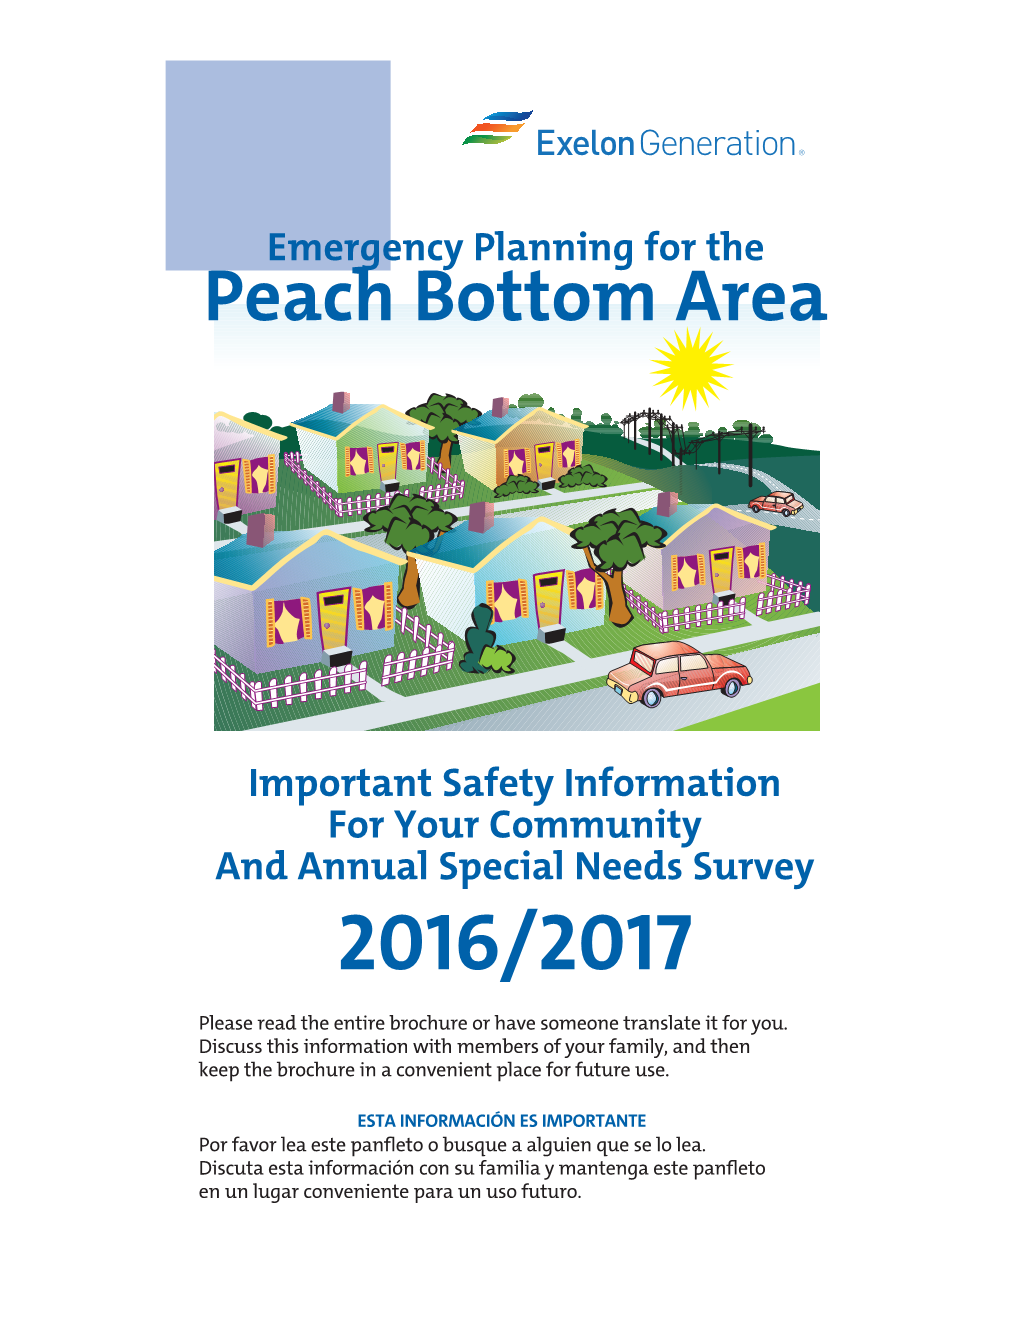 Emergency Planning for the Peach Bottom Area